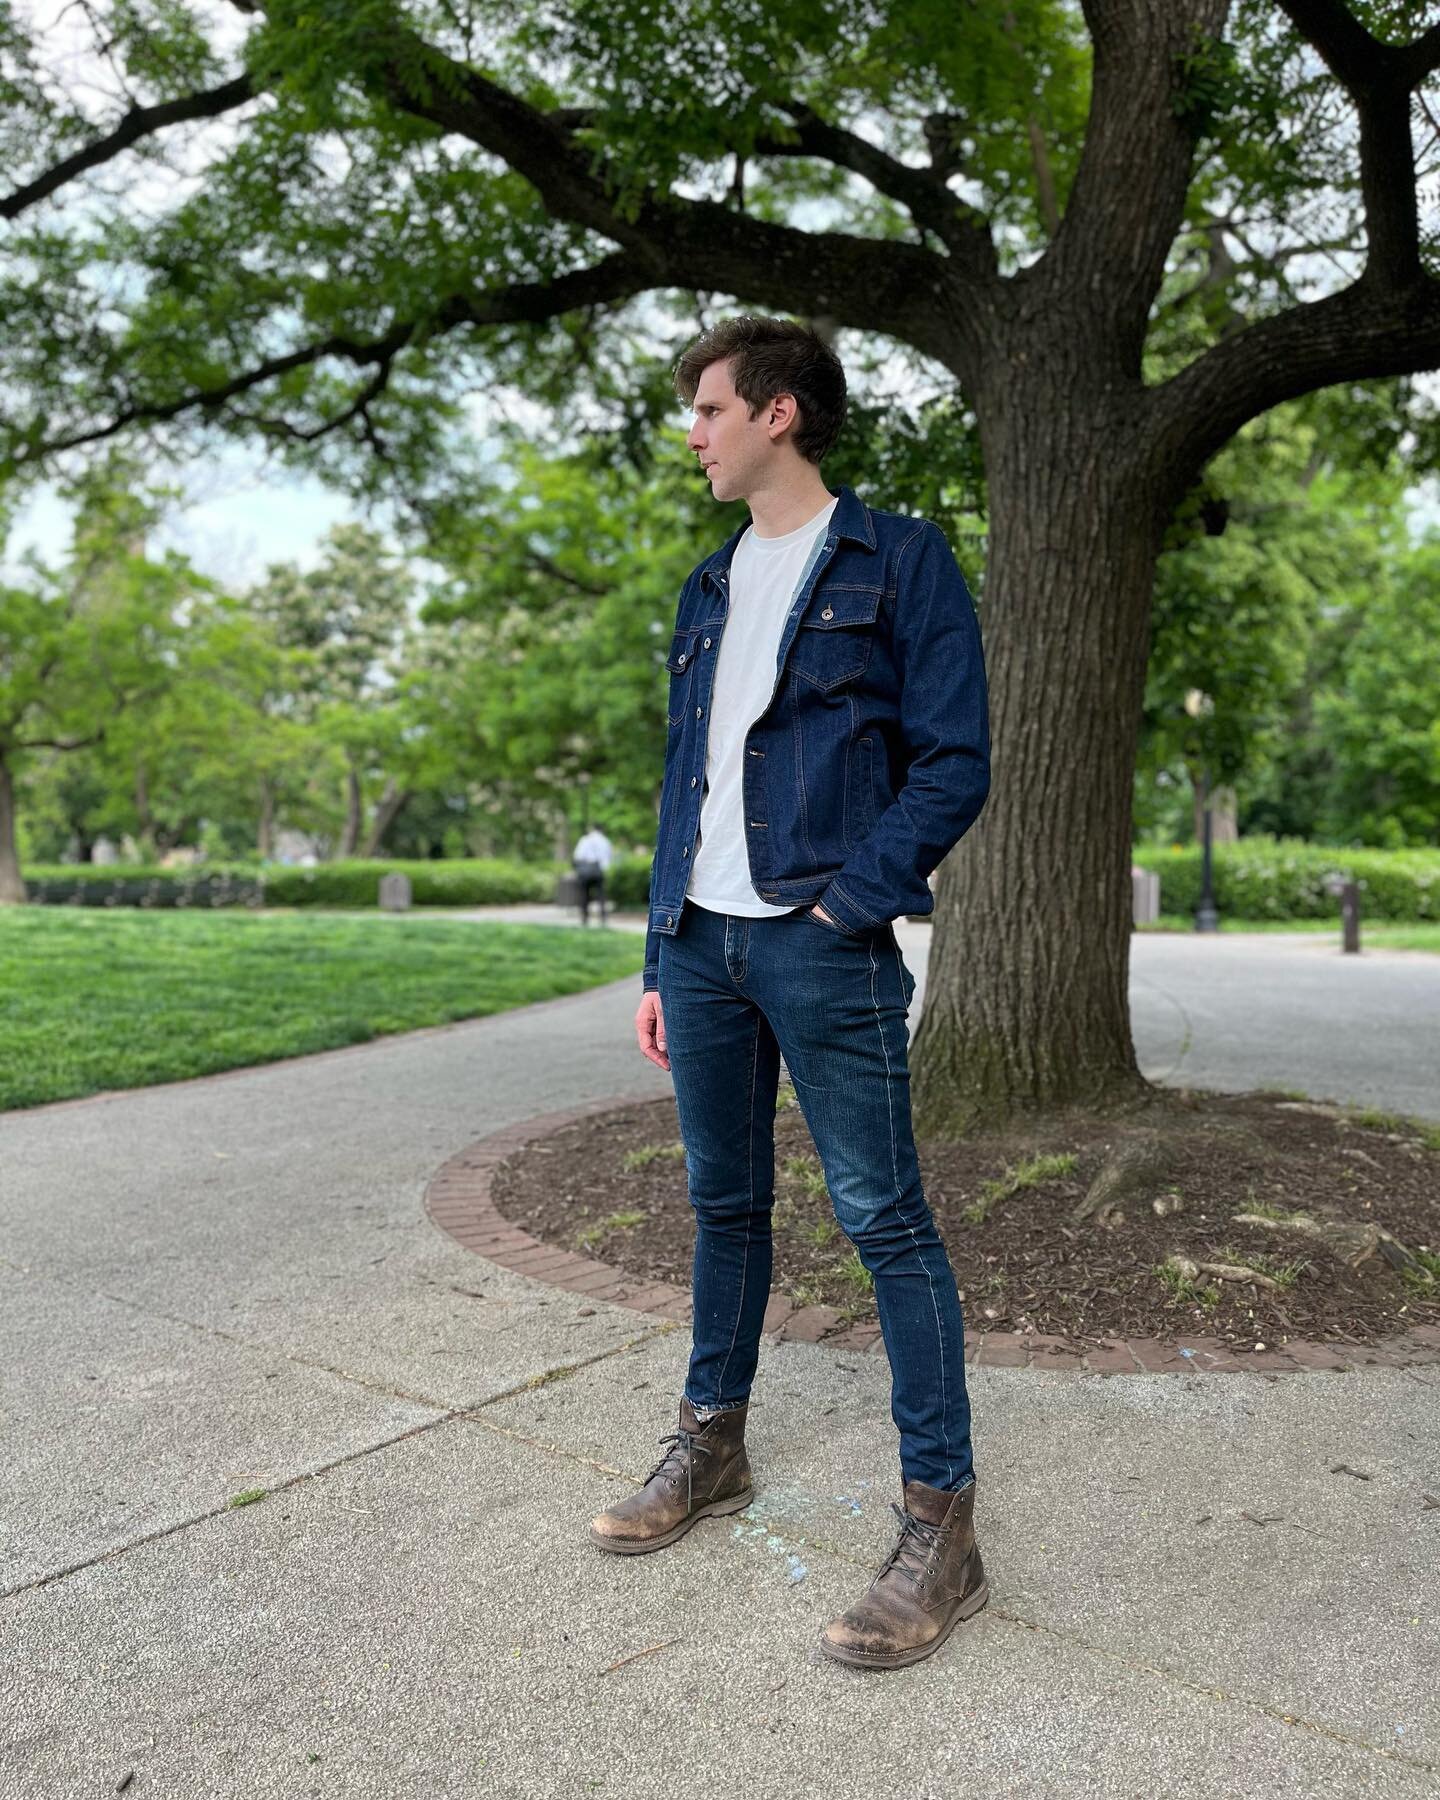 Pacing Like a Lion EP via @enrouterecords has been out for two weeks ✨✨. Thanks so much to everyone who has listened + shared 💙💙. Pls enjoy this Canadian tux lewk 🇨🇦
.
.
.
.
.
.
.
.
.
.
#indie #rock #pop #music #dreampop #shoegaze #music #art #ne